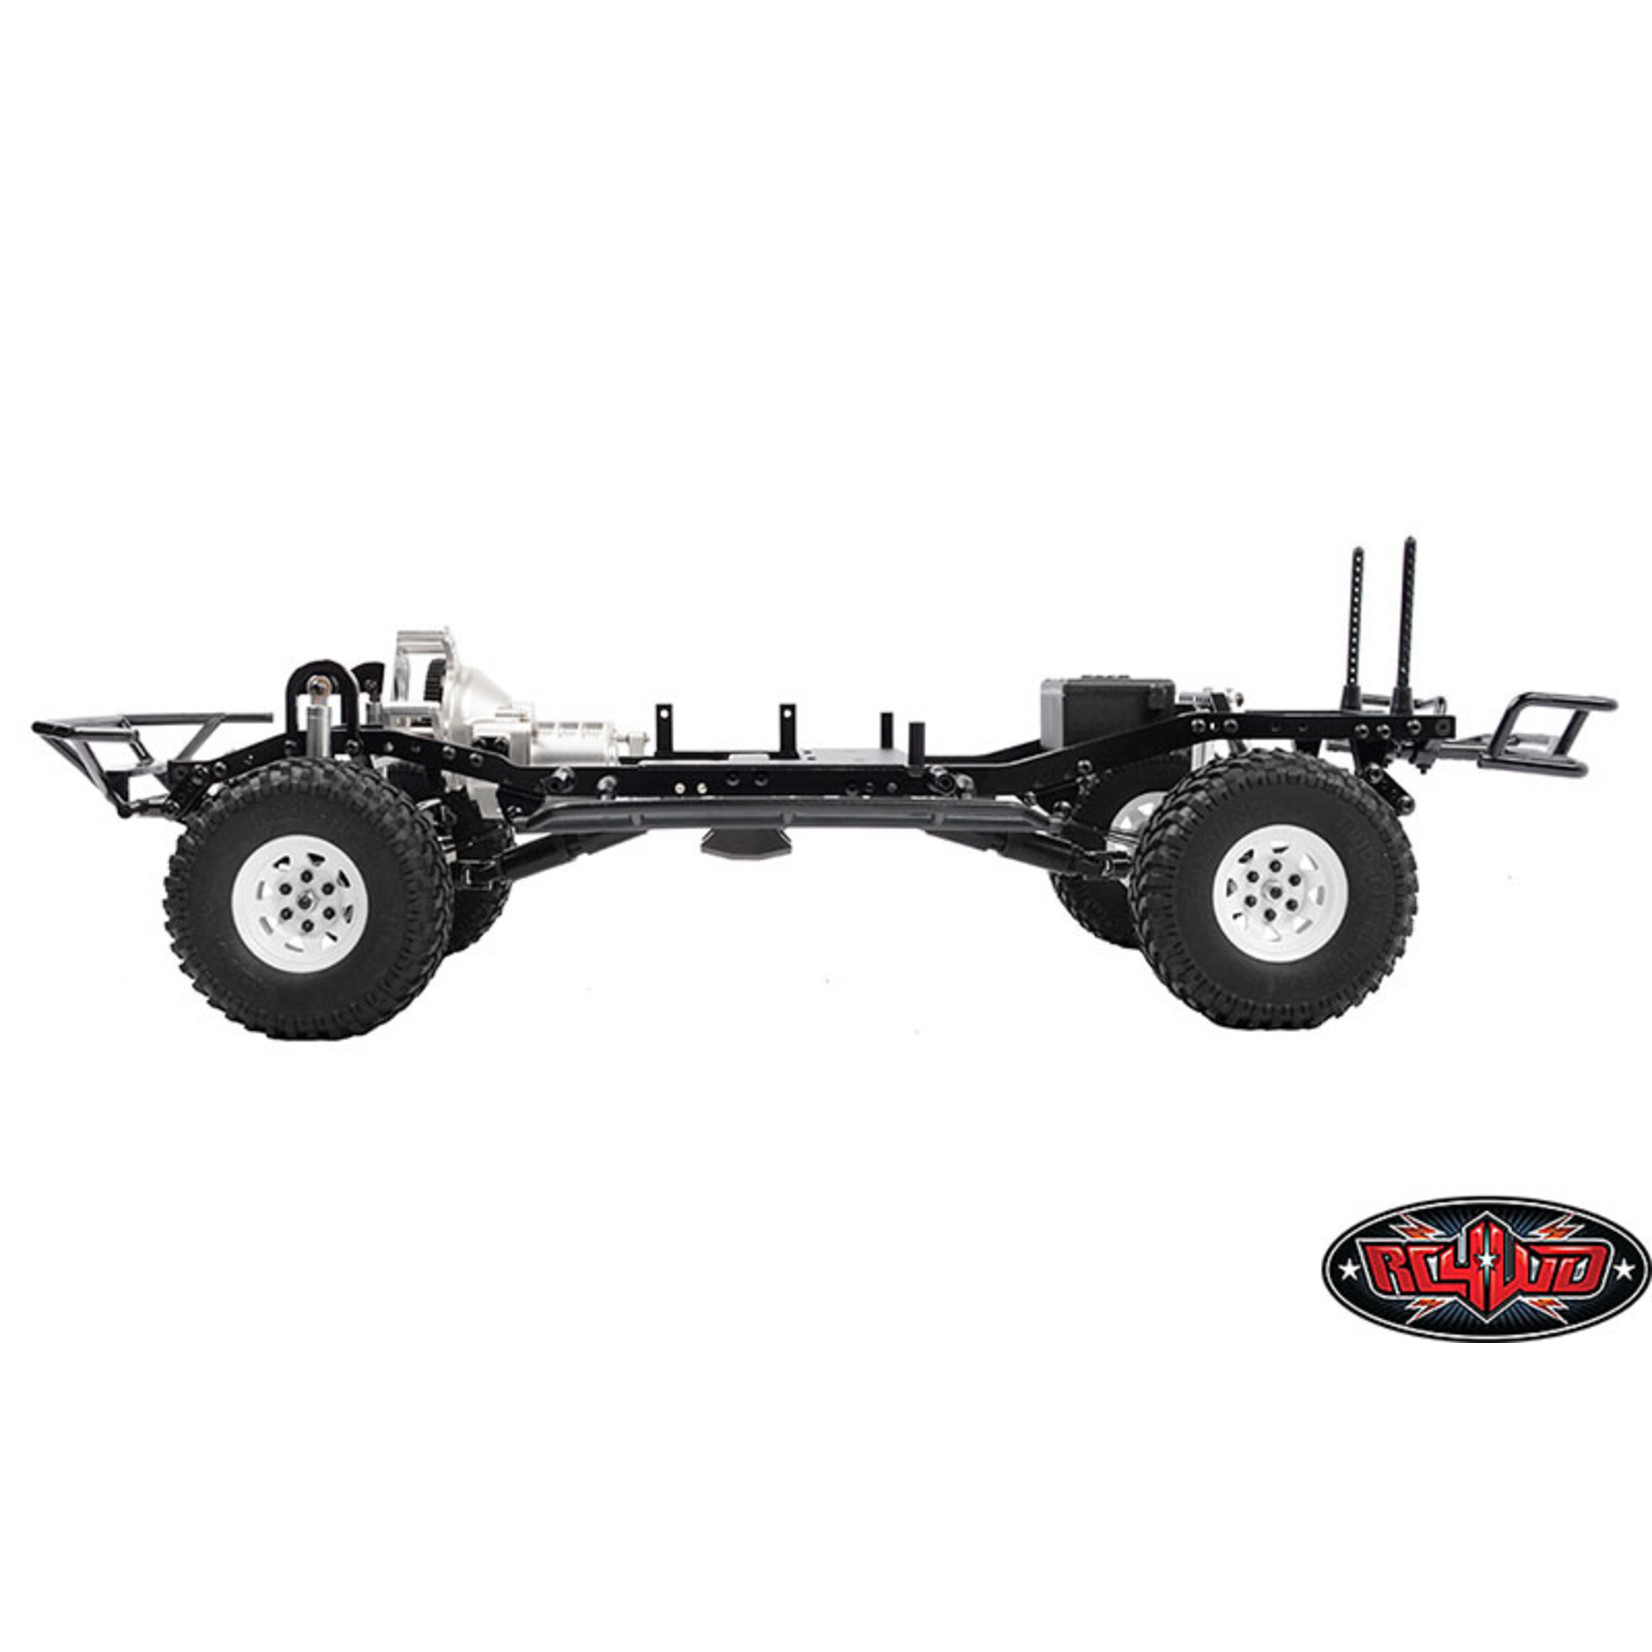 RC4WD RC4WD Trail Finder 2 Truck "LWB" Long Wheelbase Chassis Kit #Z-K0059